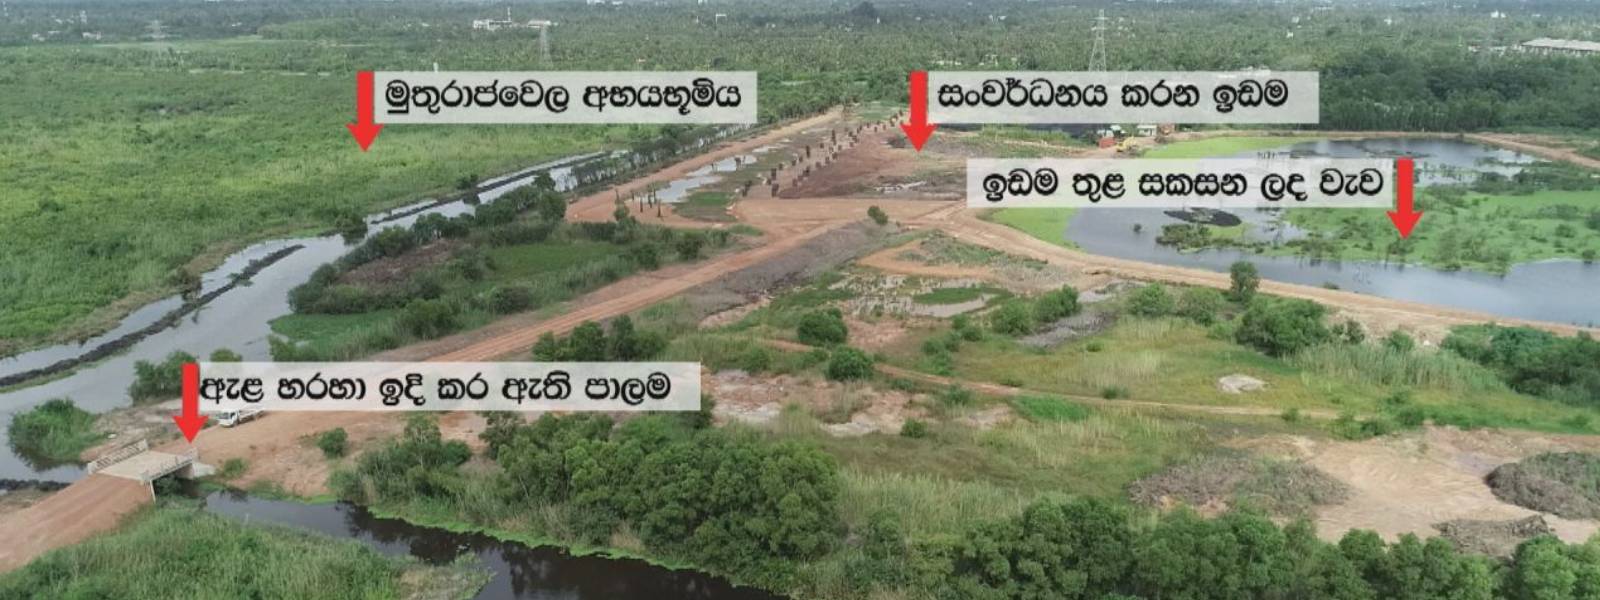 Muthurajawela Wetlands Project suspended pending inquiry, following News 1st Expose’